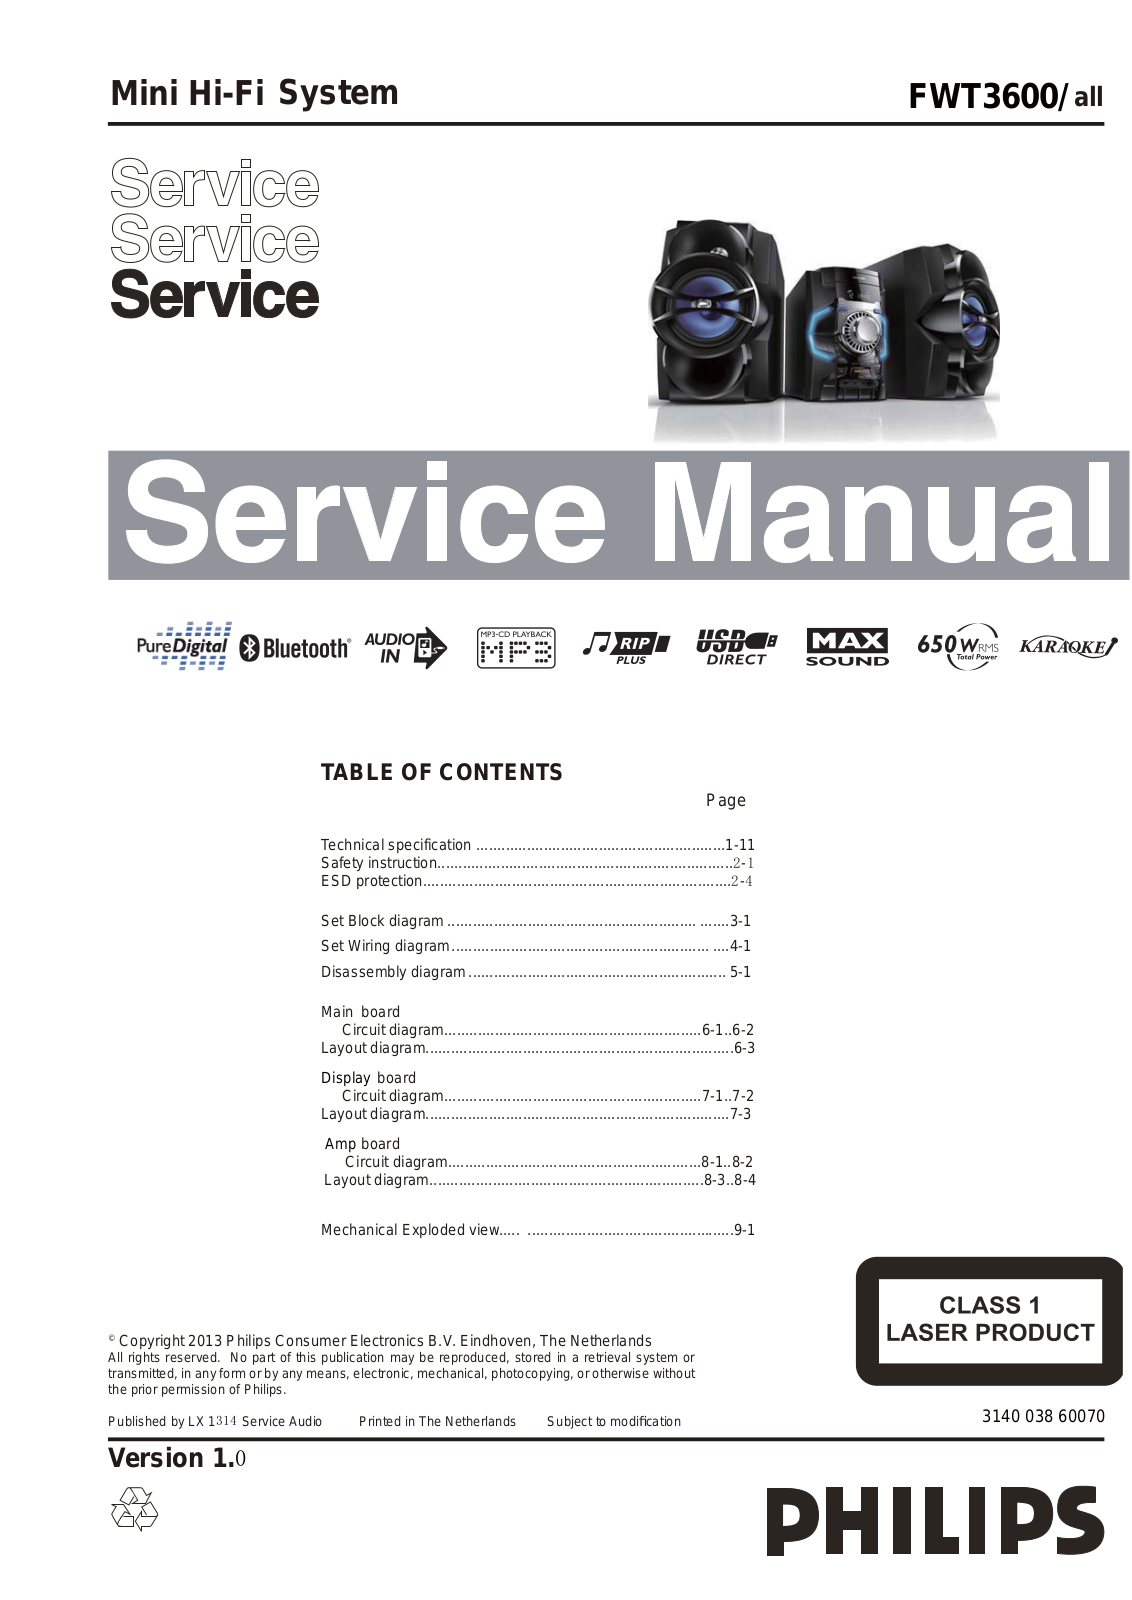 Philips FWT-3600 Service Manual